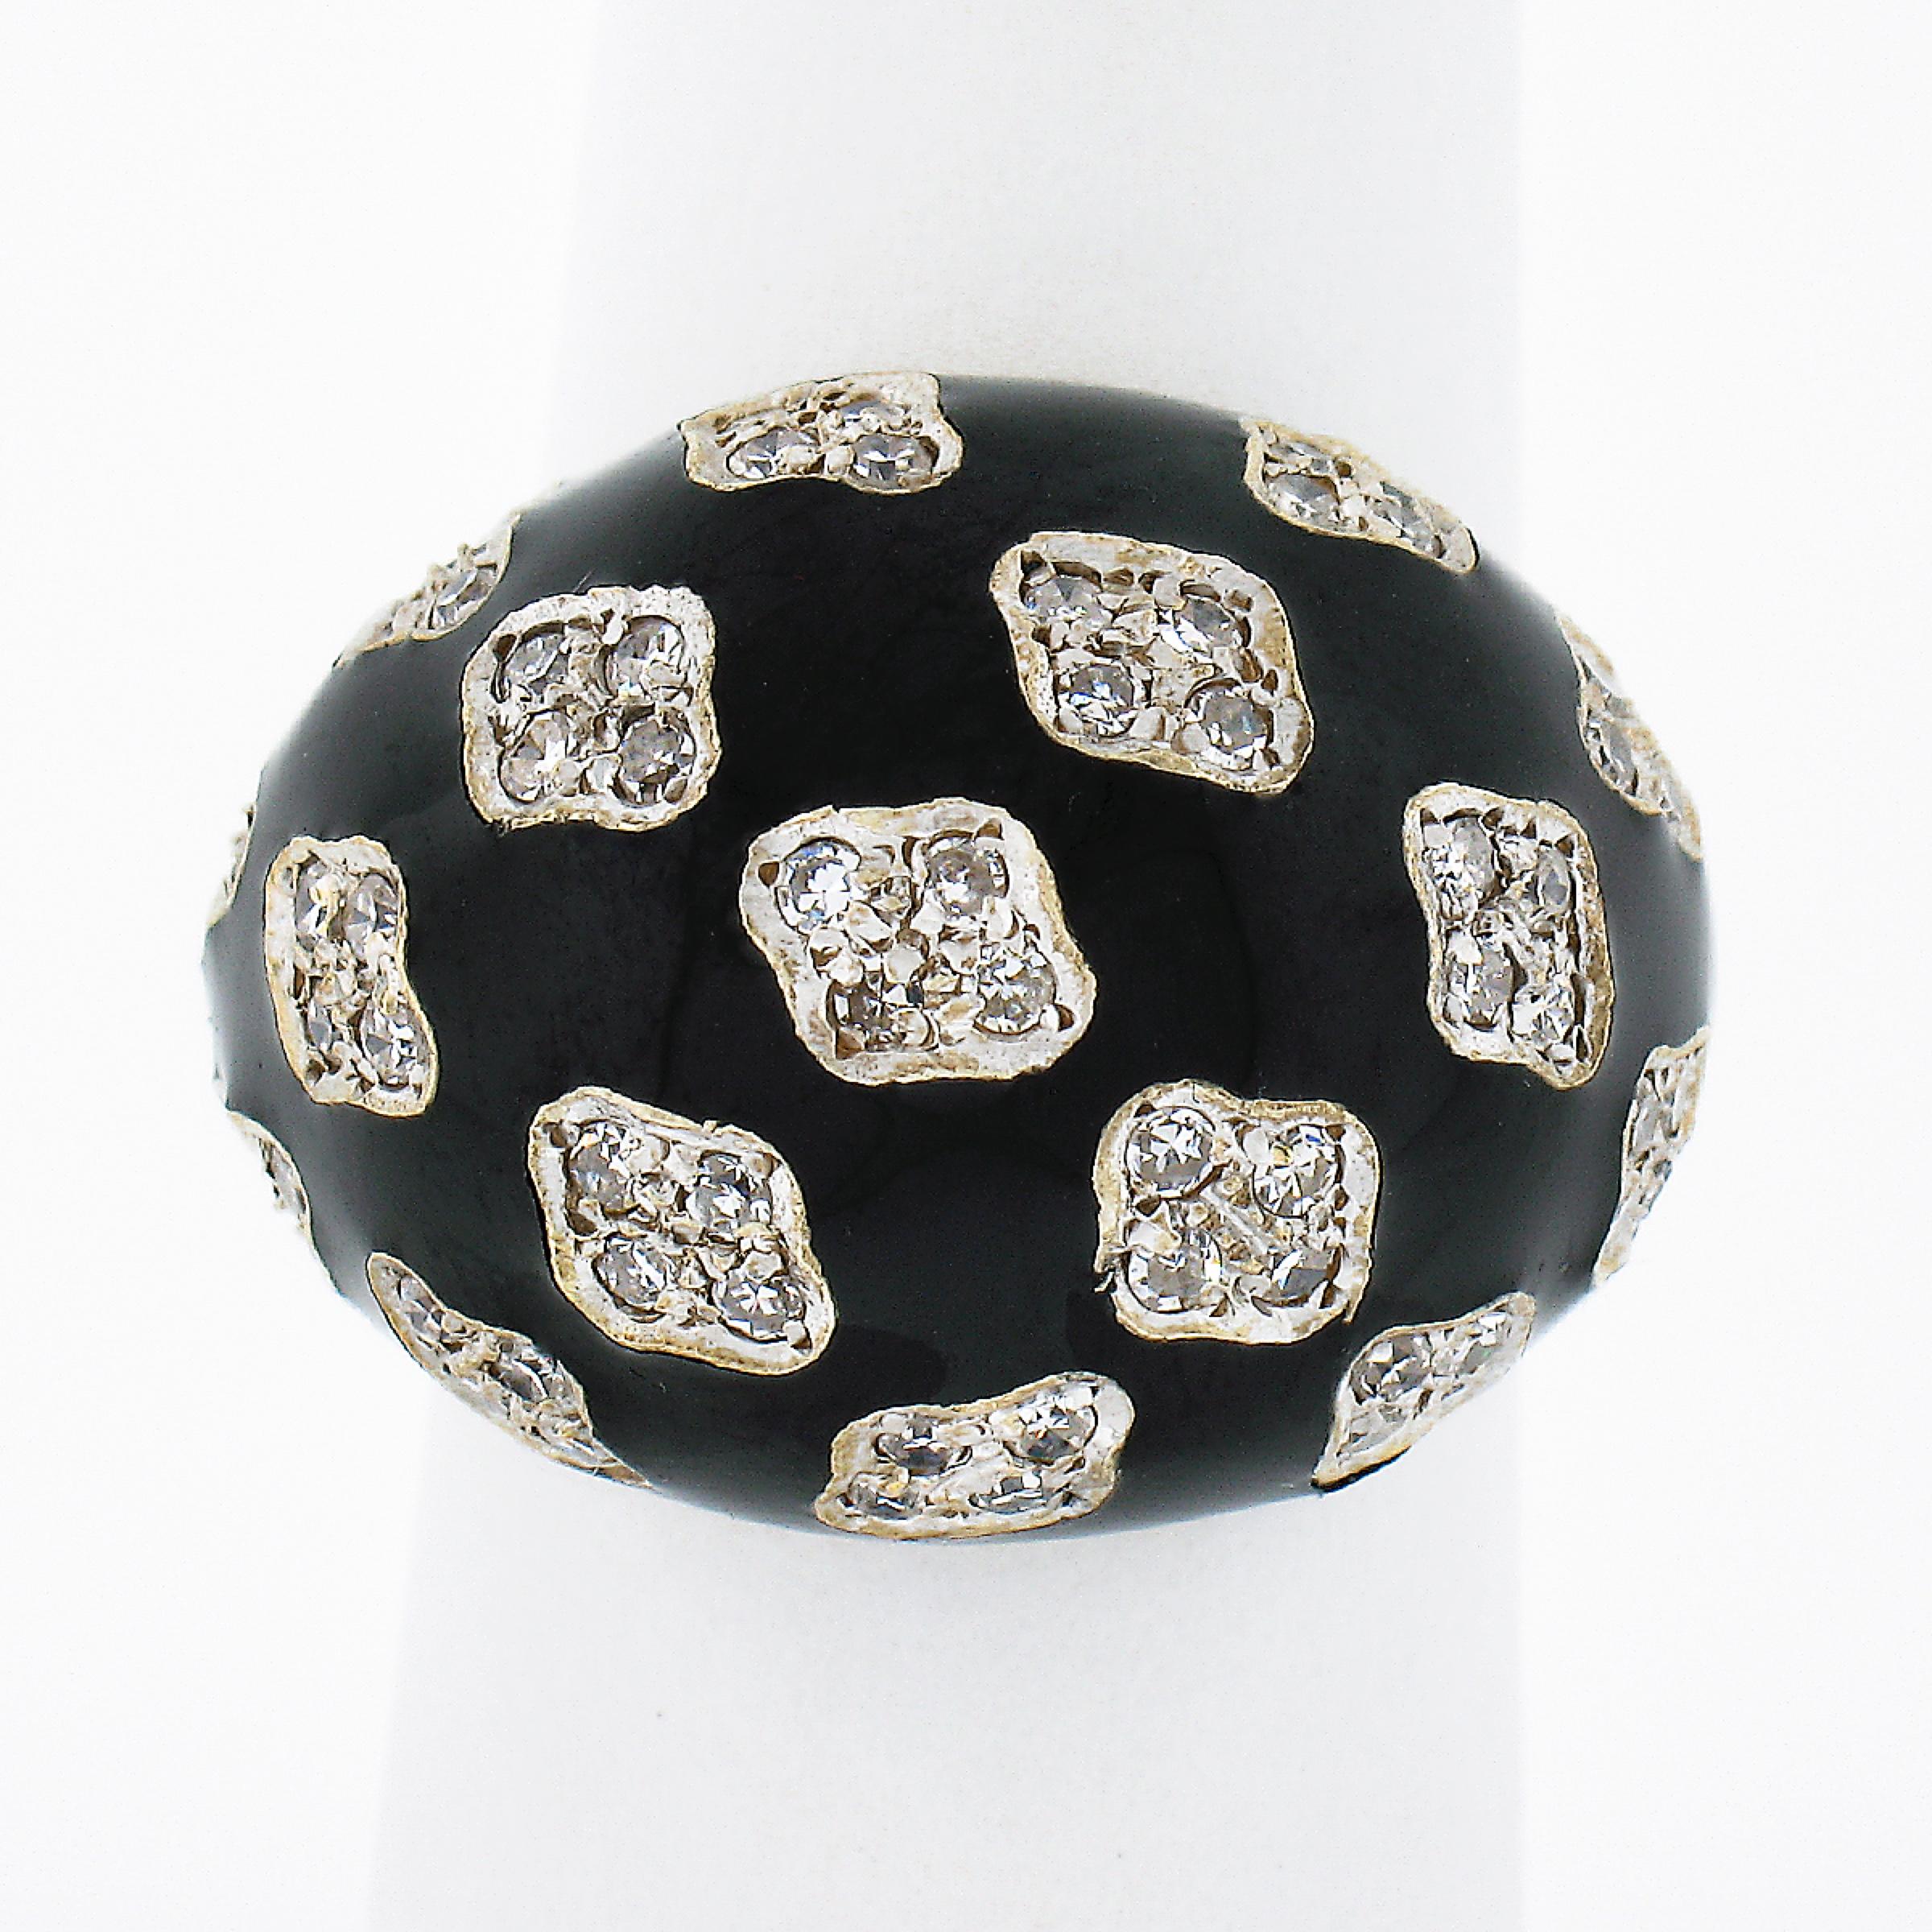 This beautiful vintage bombé ring was crafted from solid 18k yellow and white gold. It features a round domed top of which is adorned with clusters of fine diamonds neatly set throughout and further surrounded by black enamel. The old single cut